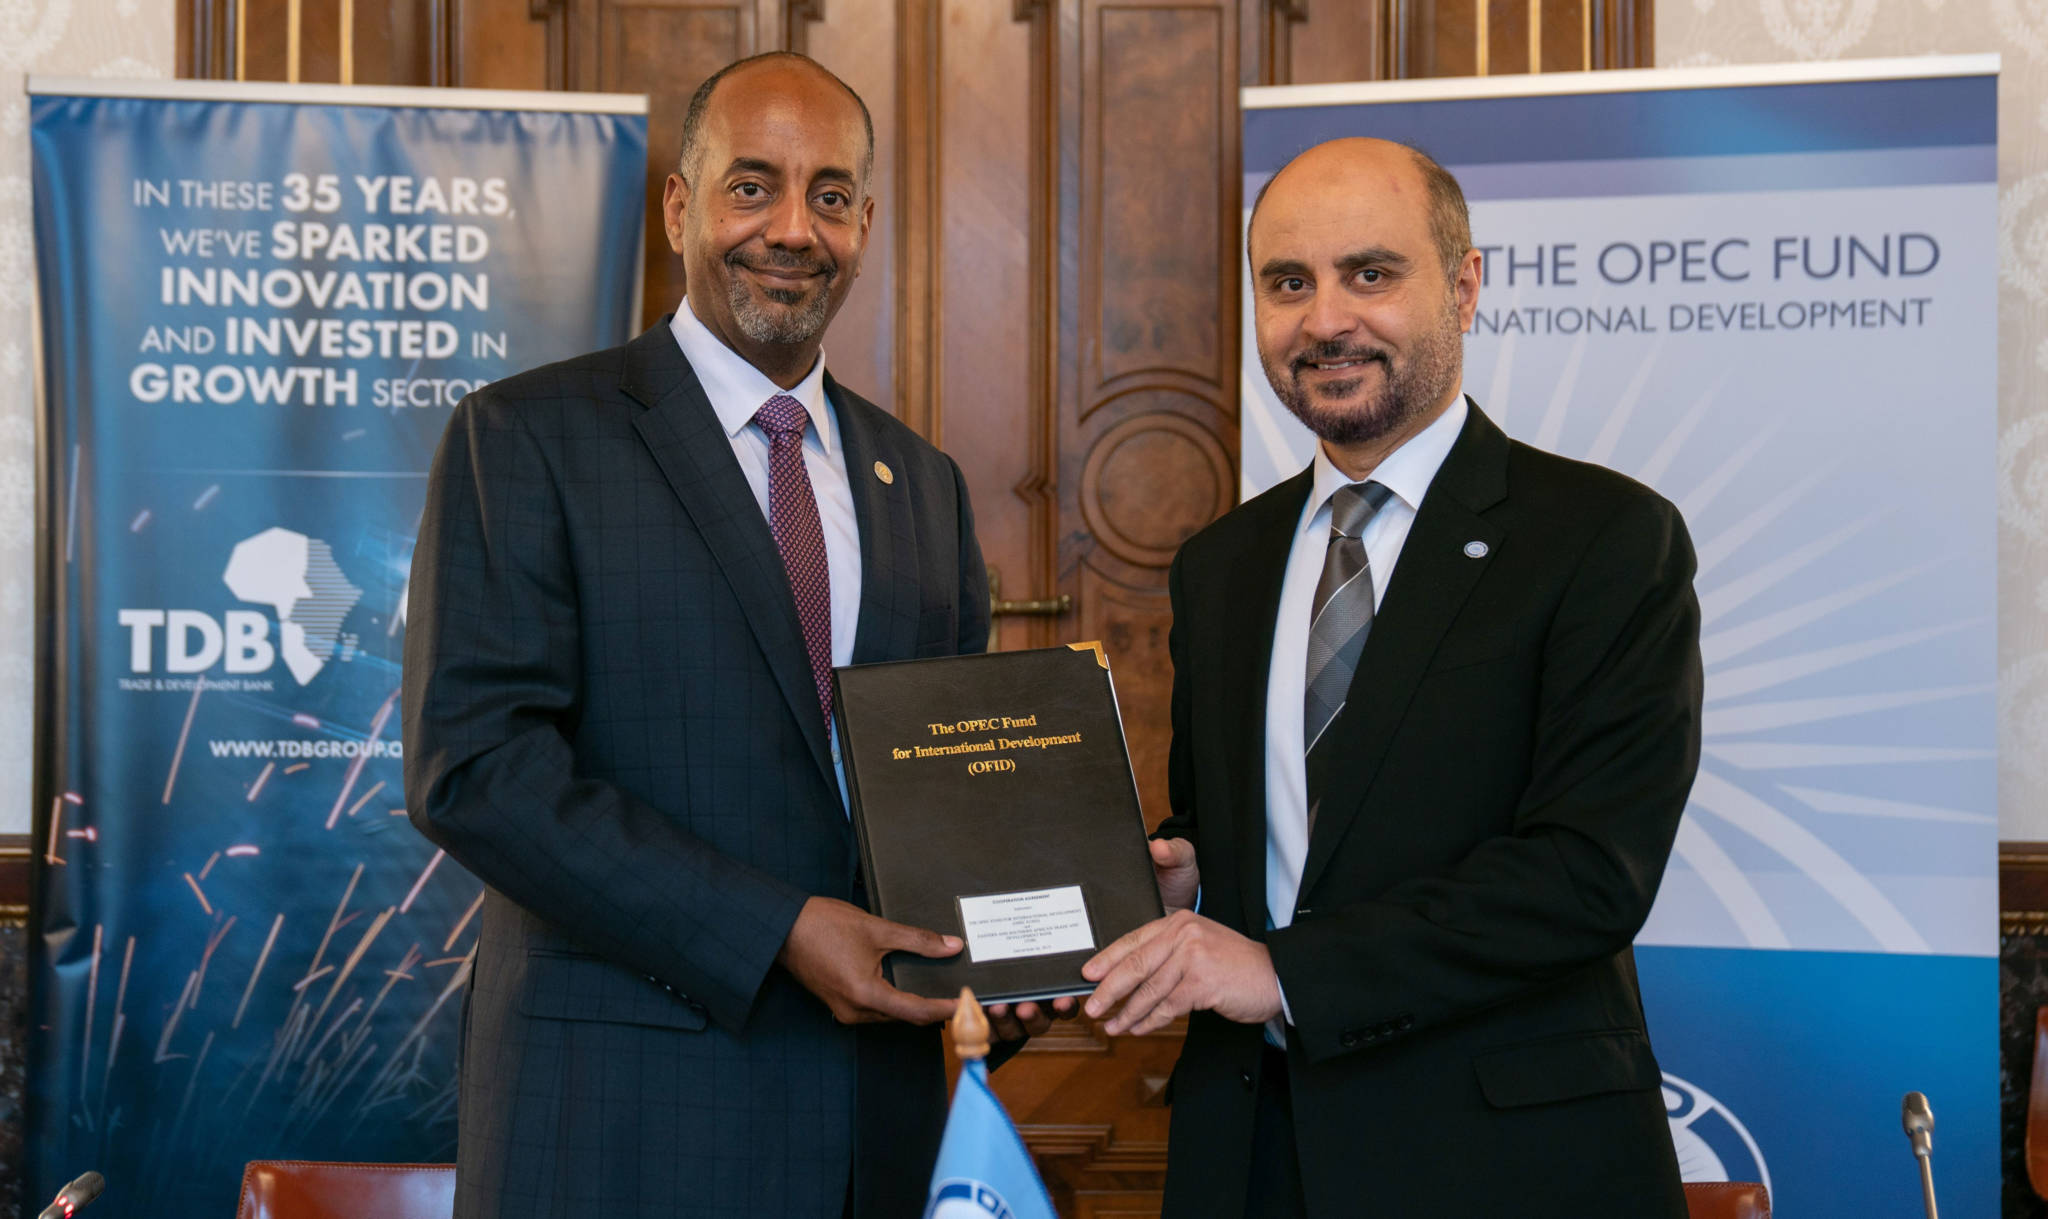 OPEC Fund Director-General Dr Abdulhamid Alkhalifa (right) and TDB President and Chief Executive Admassu Tadesse signed a cooperation agreement to strengthen private sector development across Africa.